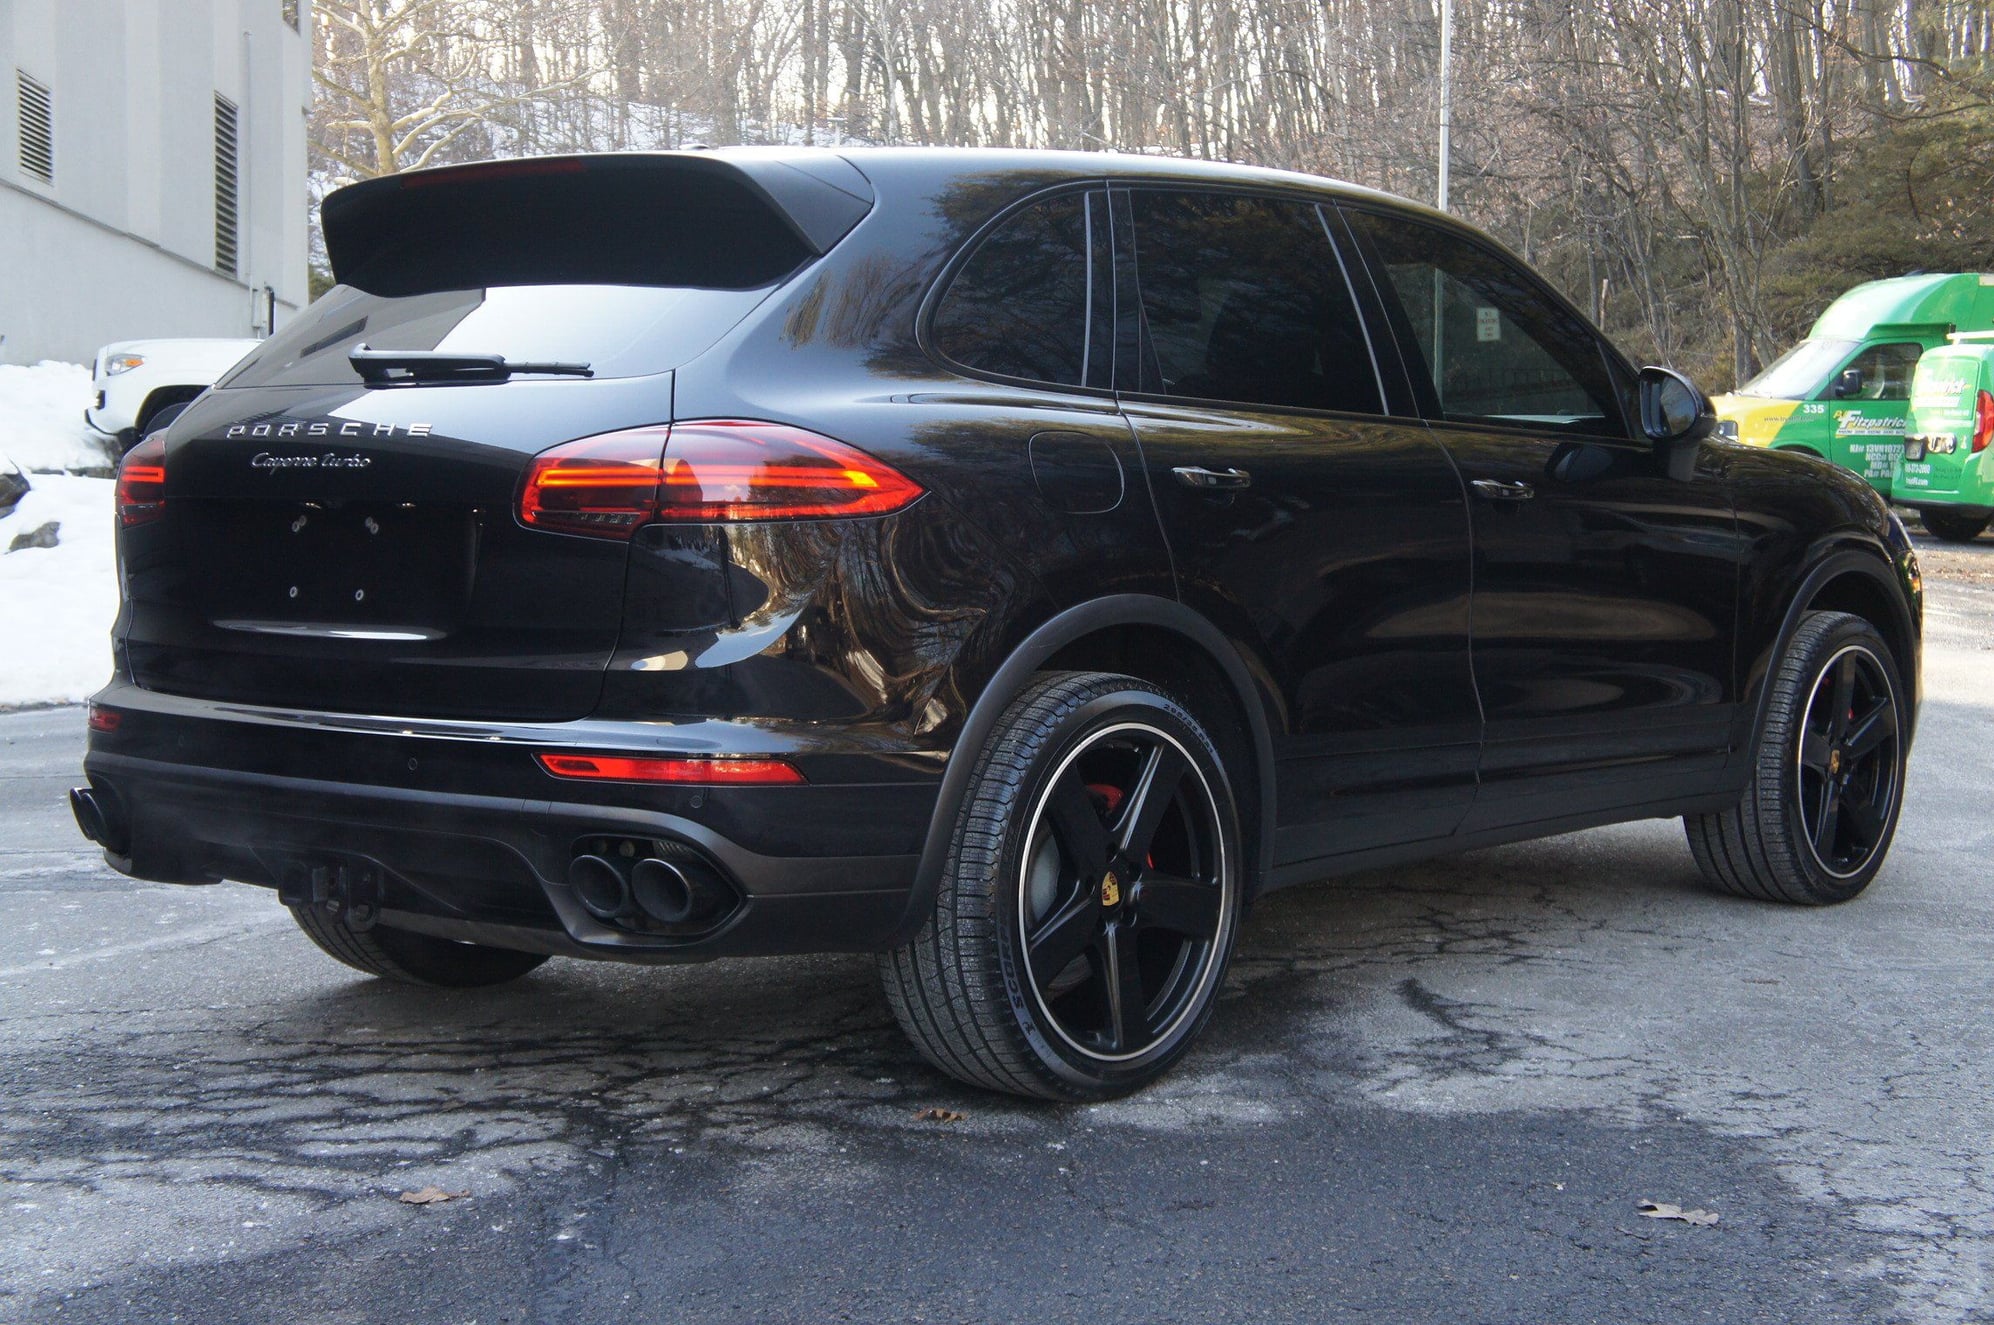 2018 Porsche Cayenne - 2018 PORSCHE CAYENNE TURBO **only 259 made** MSRP $135,660 - Used - VIN 00000000000000001 - 36,200 Miles - 8 cyl - AWD - Automatic - SUV - Black - Parsippany, NJ 07054, United States